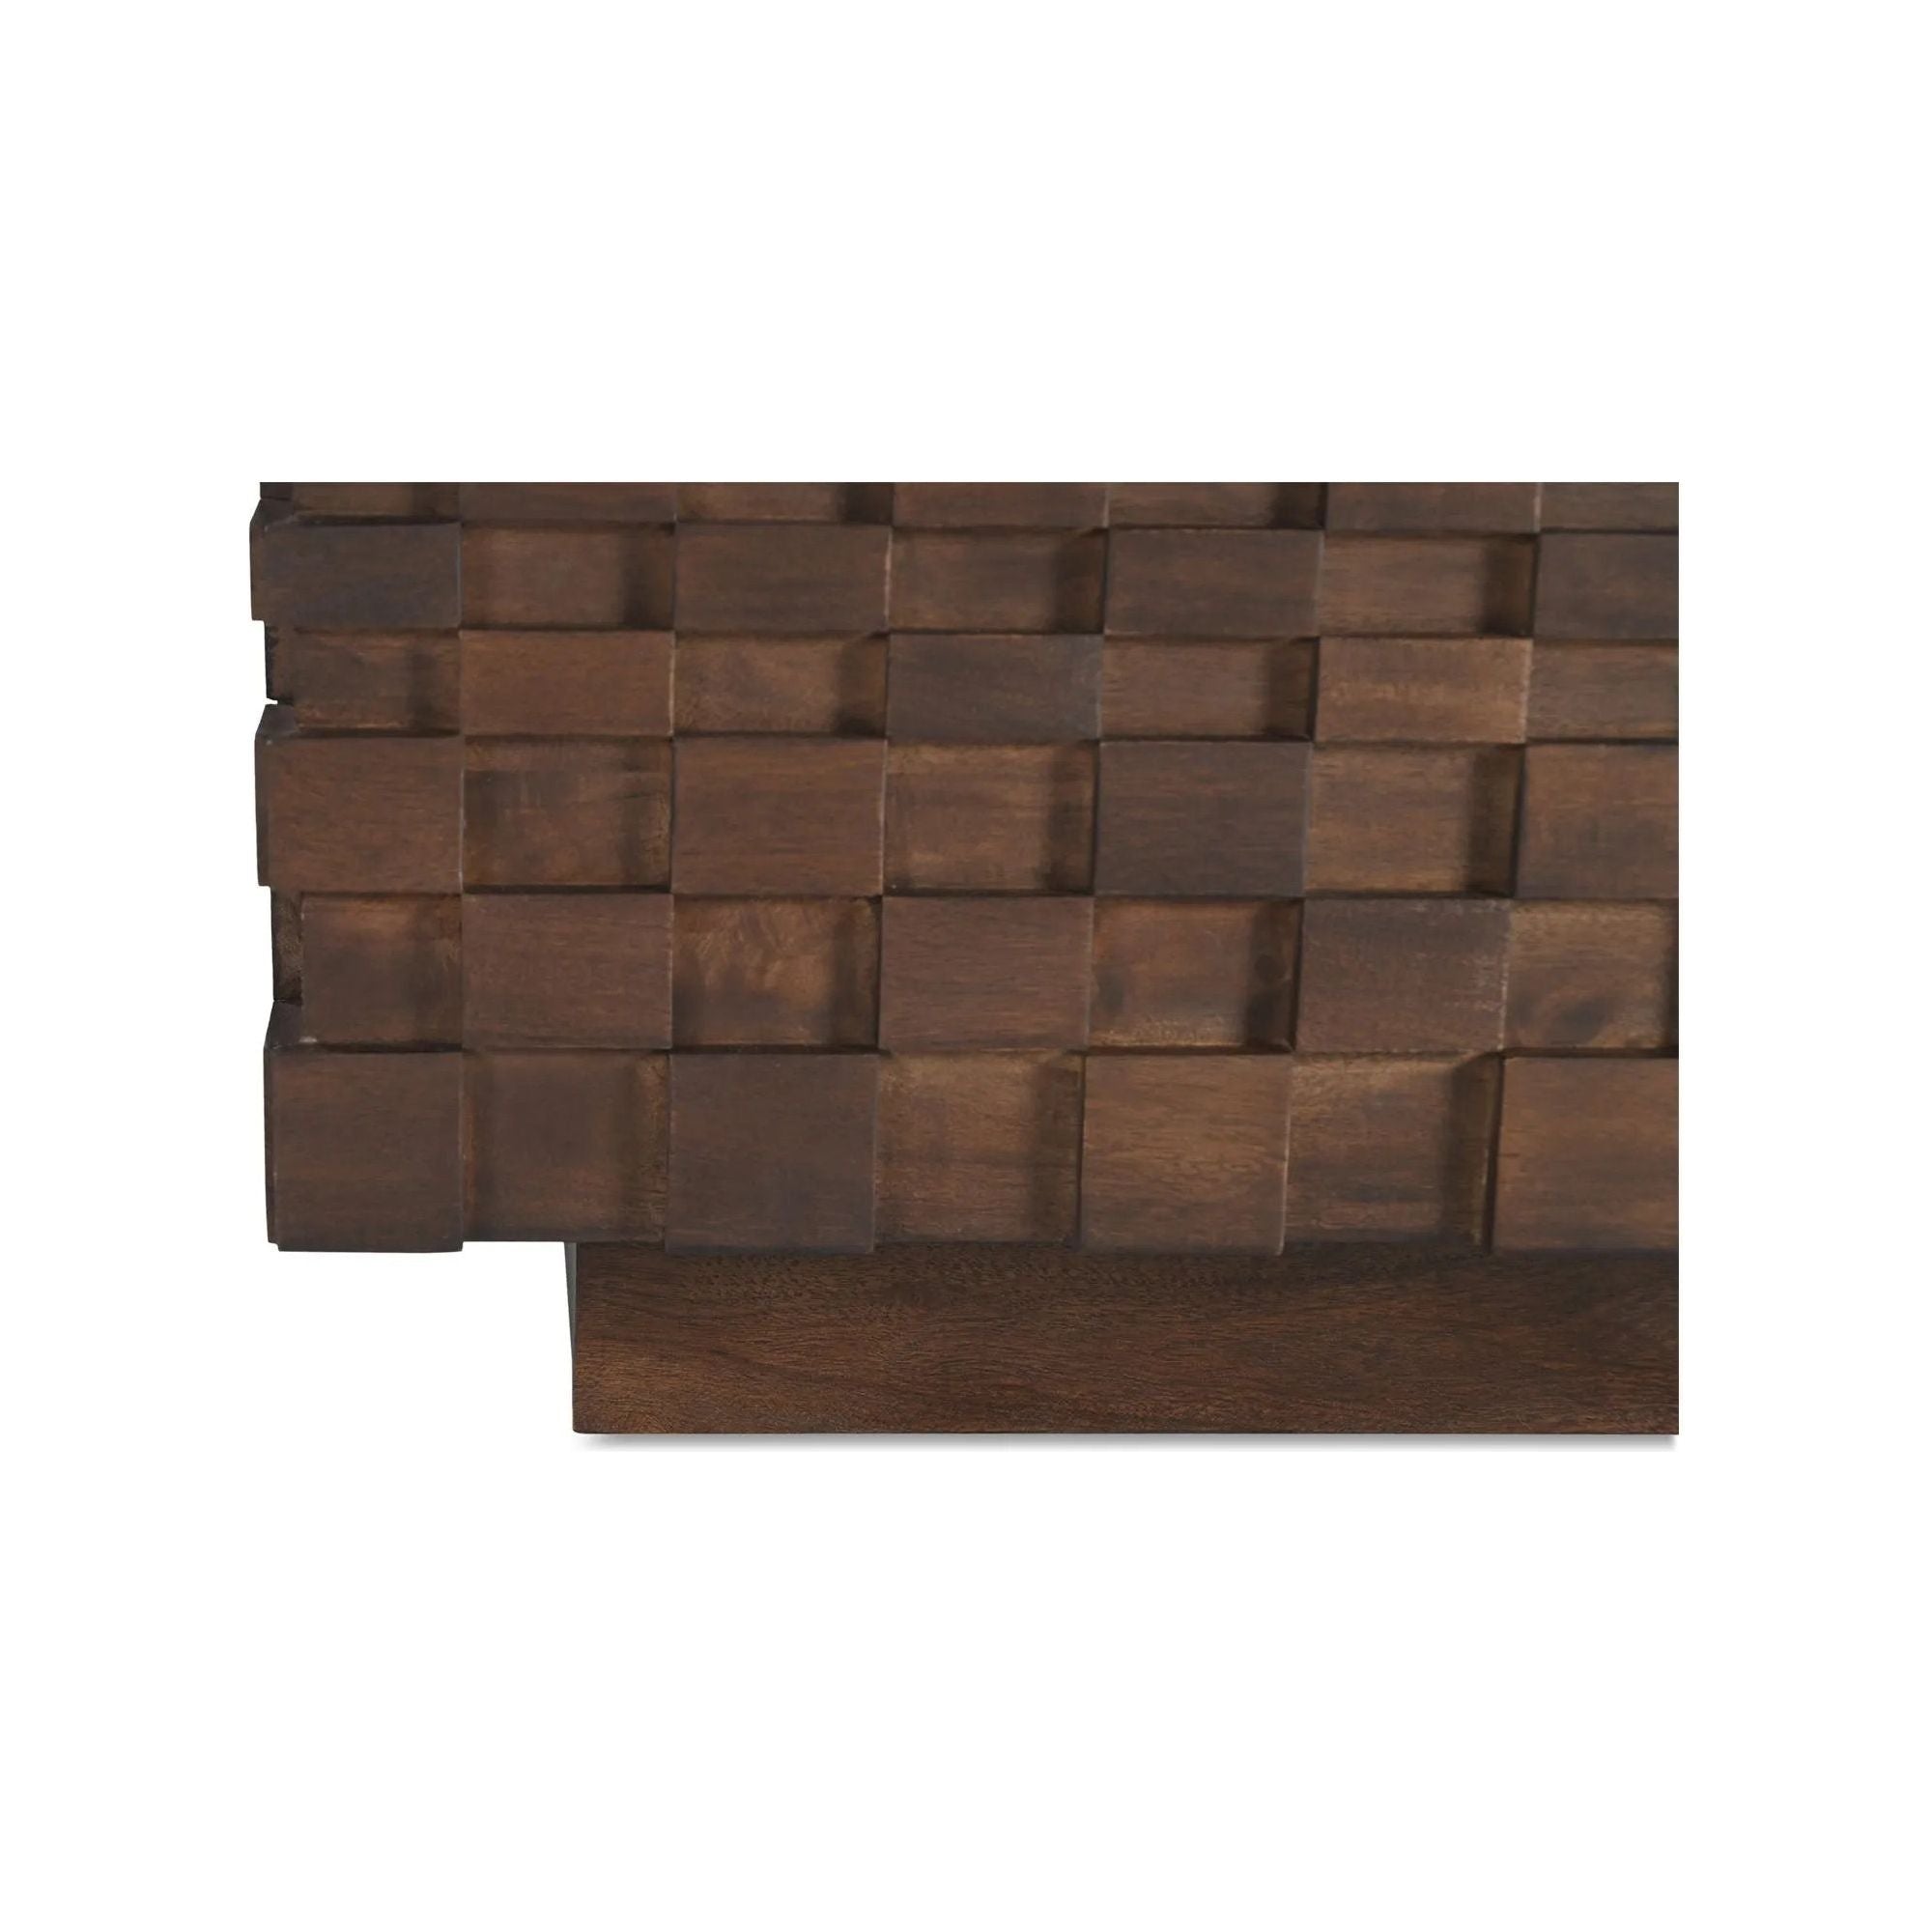 Inspired from the appreciation of geometric patterns and the beauty of simplicity, the Easton storage coffee table transforms two-dimensional designs into intriguing three-dimensional textures. Amethyst Home provides interior design, new home construction design consulting, vintage area rugs, and lighting in the Miami metro area.